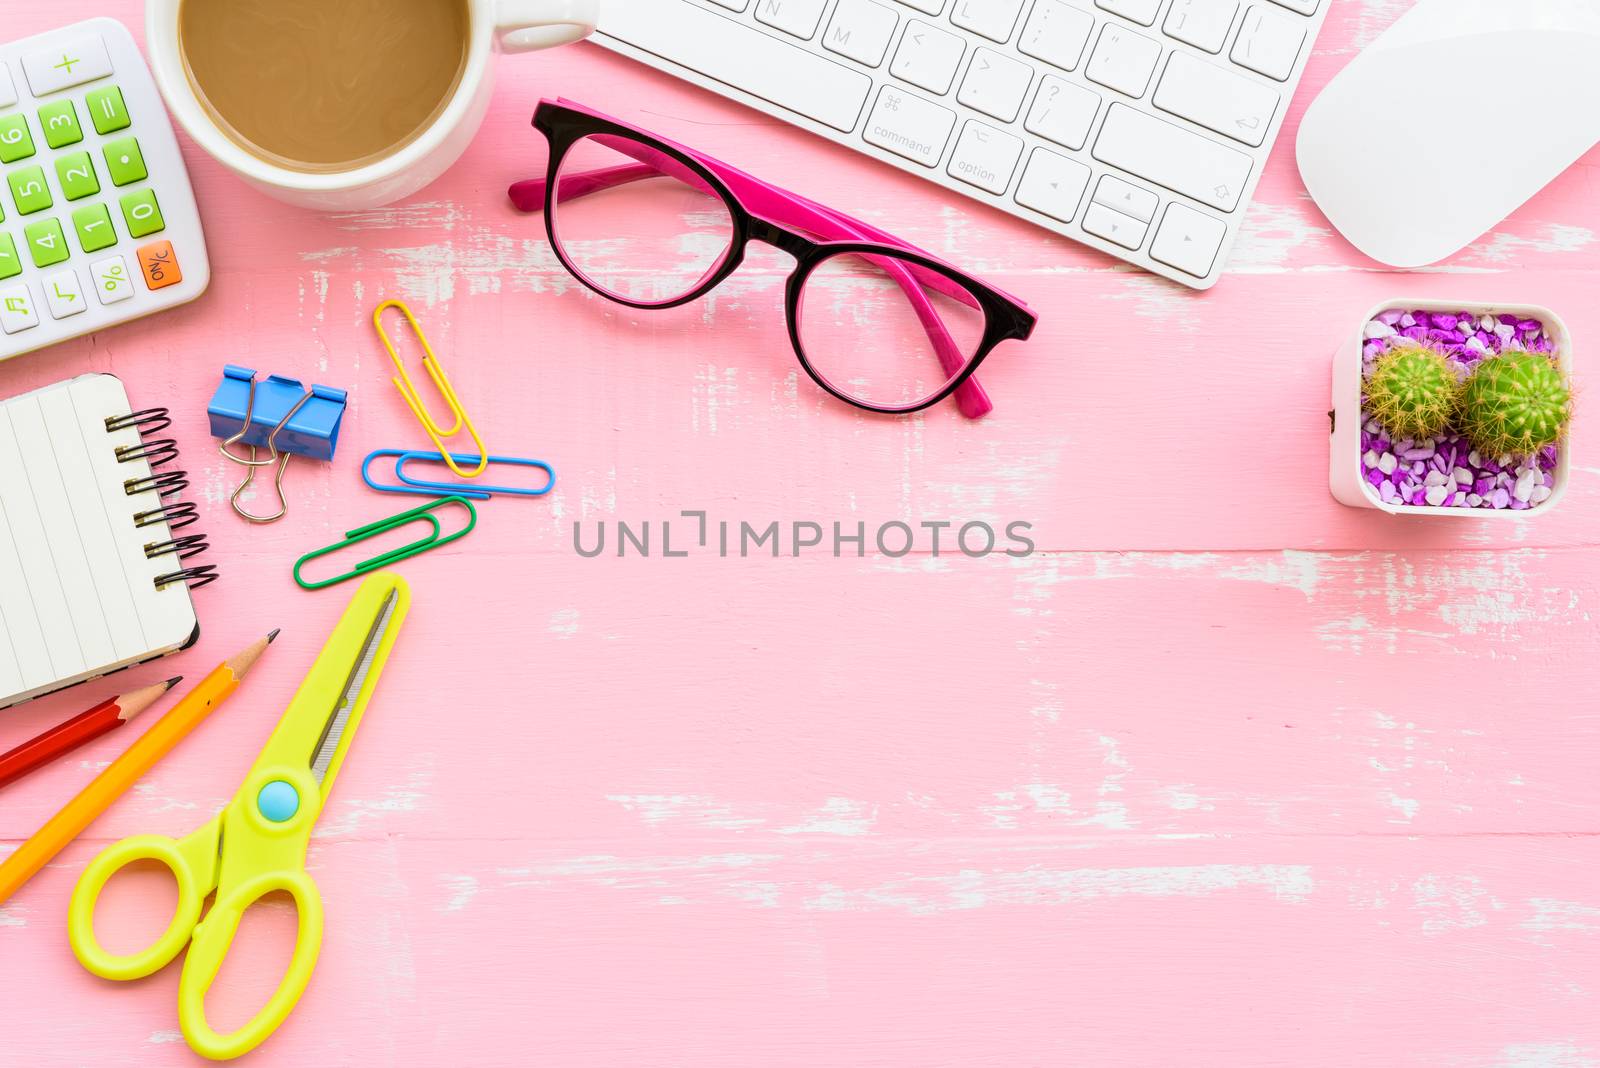 Top view office table with workspace and office accessories including calculator, mouse, keyboard, glasses, clips, flower, pen, pencil, note book, laptop and coffee on pink and white wooden background.